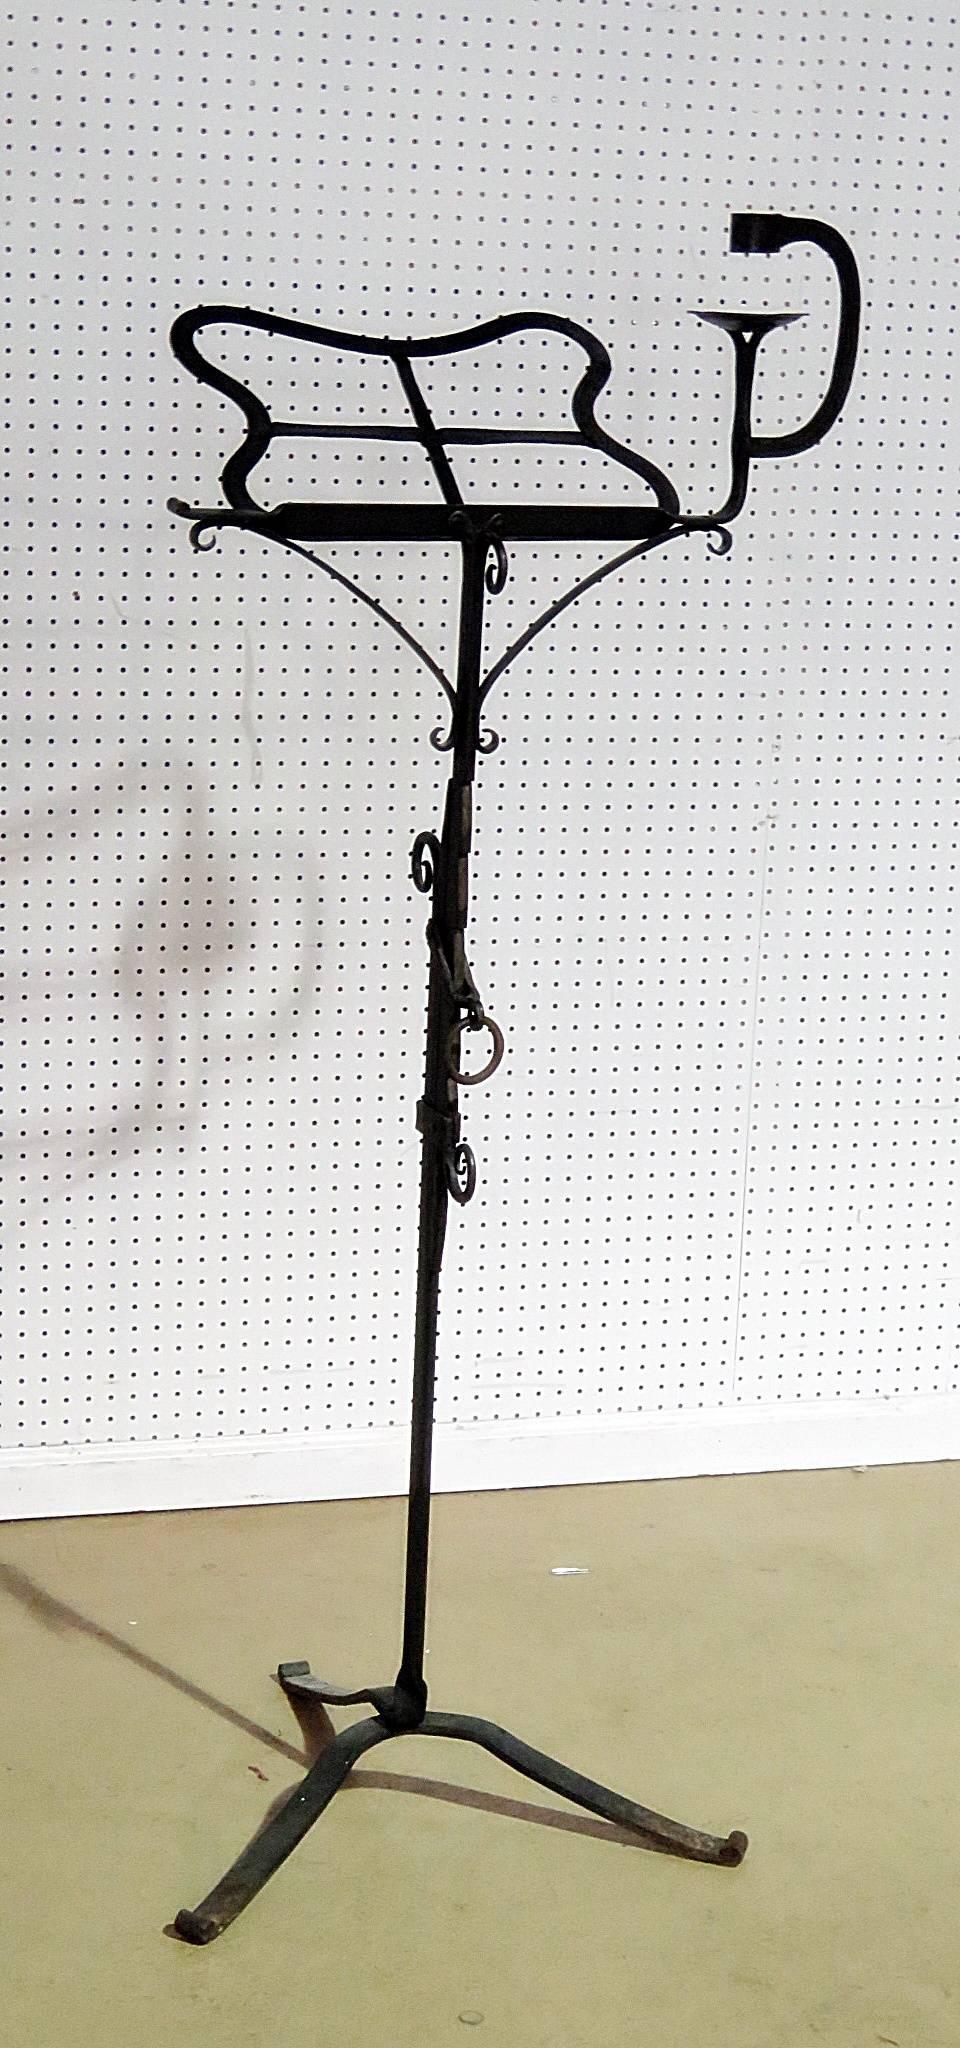 Antique wrought iron music stand with candleholder attributed to Samuel Yellin.